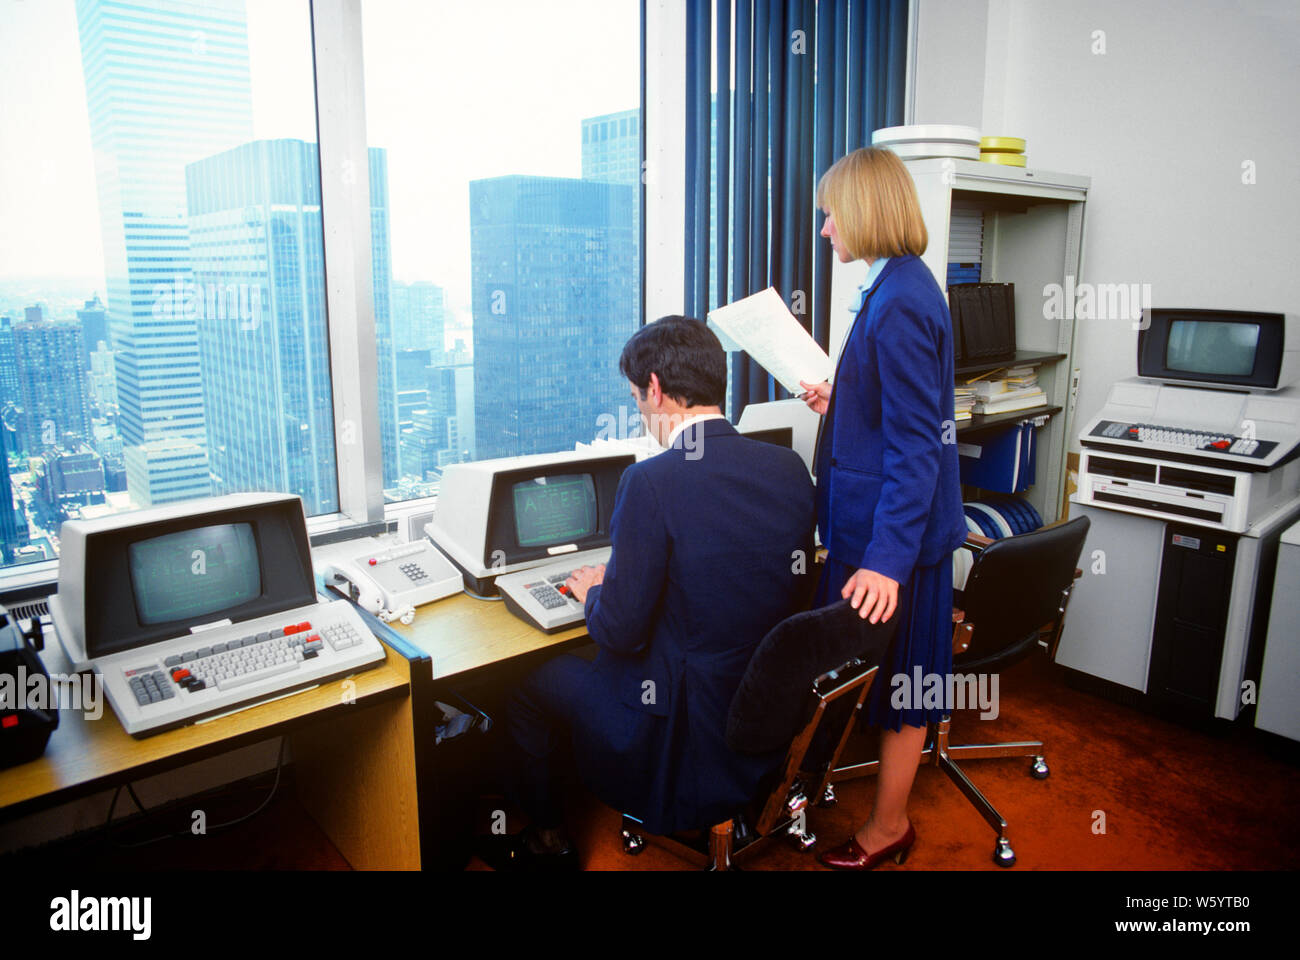 1980s URBAN OFFICE WITH EARLY HARDWARE MAN SEATED AT COMPUTER TERMINAL BY WINDOW WOMAN HOLDING PAPERS STANDING AT HIS SHOULDER - ko1310 PHT001 HARS INSTRUMENTS TECHNOLOGY TEAMWORK INFORMATION LIFESTYLE HISTORY FEMALES COMMUNICATING SEATED UNITED STATES COPY SPACE FULL-LENGTH HALF-LENGTH LADIES COMPUTERS PERSONS UNITED STATES OF AMERICA MALES CONFIDENCE SCREENS BUSINESSWOMAN NORTH AMERICA WORK PLACE NORTH AMERICAN SUIT AND TIE SELLING HIGH ANGLE EARLY HIS NETWORKING MONITORS PROGRESS INNOVATION PRIDE REAR VIEW OPPORTUNITY AUTHORITY OCCUPATIONS HIGH TECH CONNECTION ELECTRIC APPLIANCE HARDWARE Stock Photo